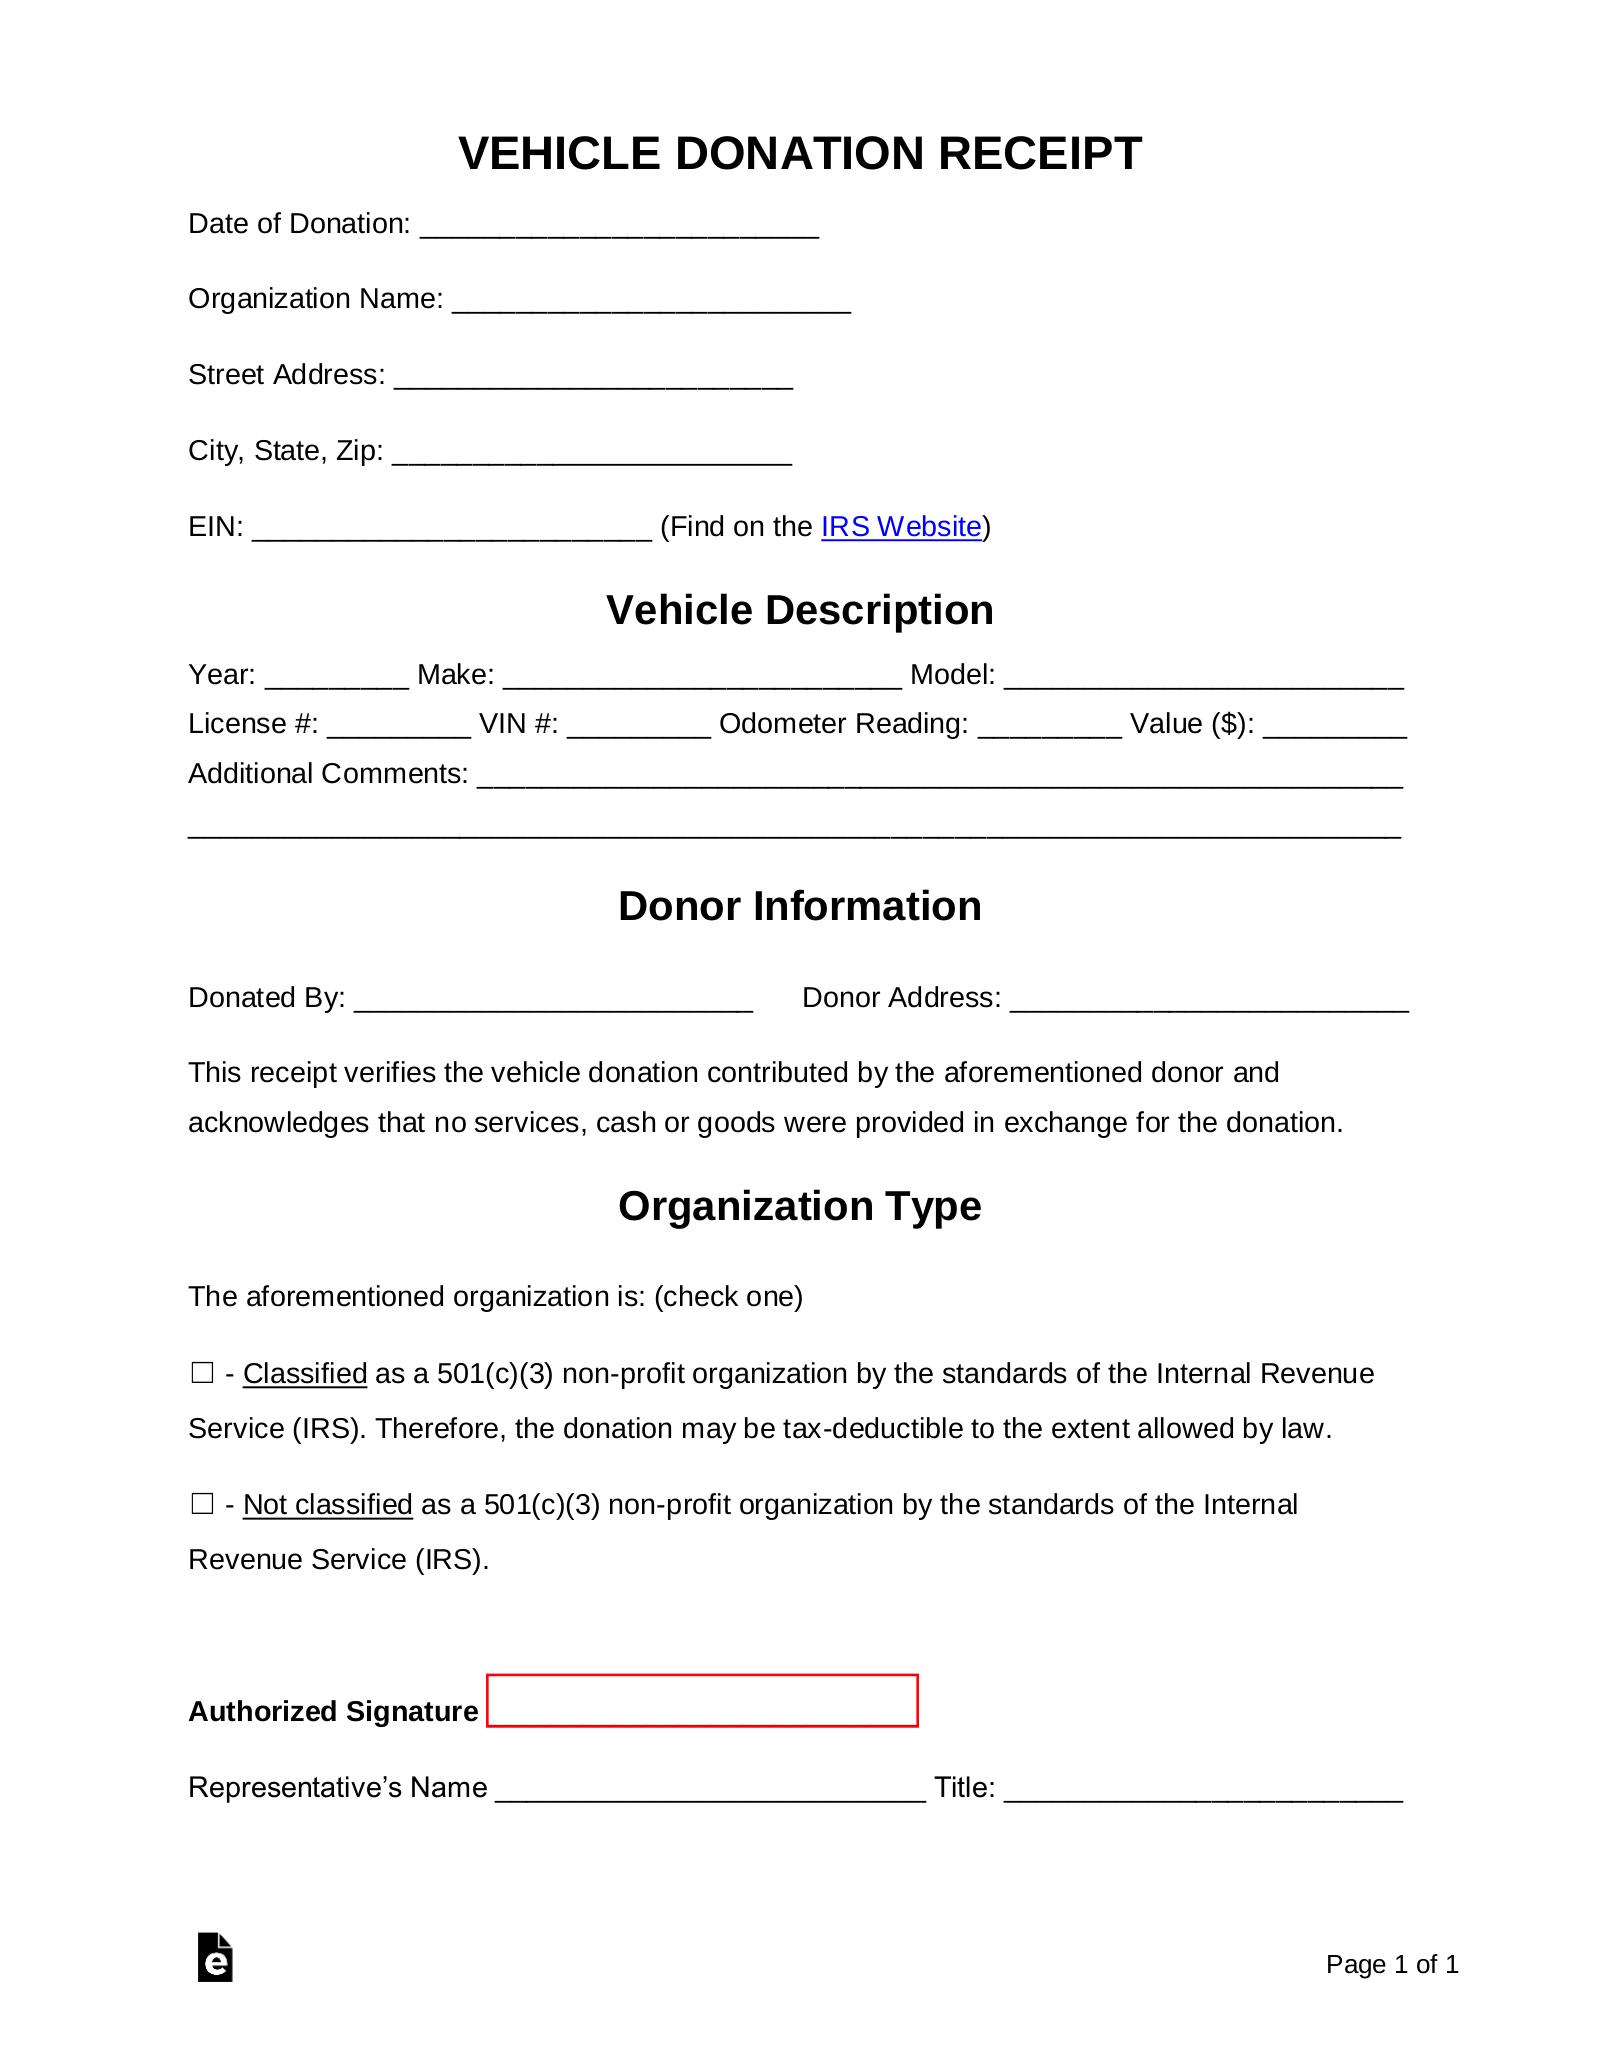 Free Vehicle Donation Receipt Template - Sample - PDF | Word – eForms